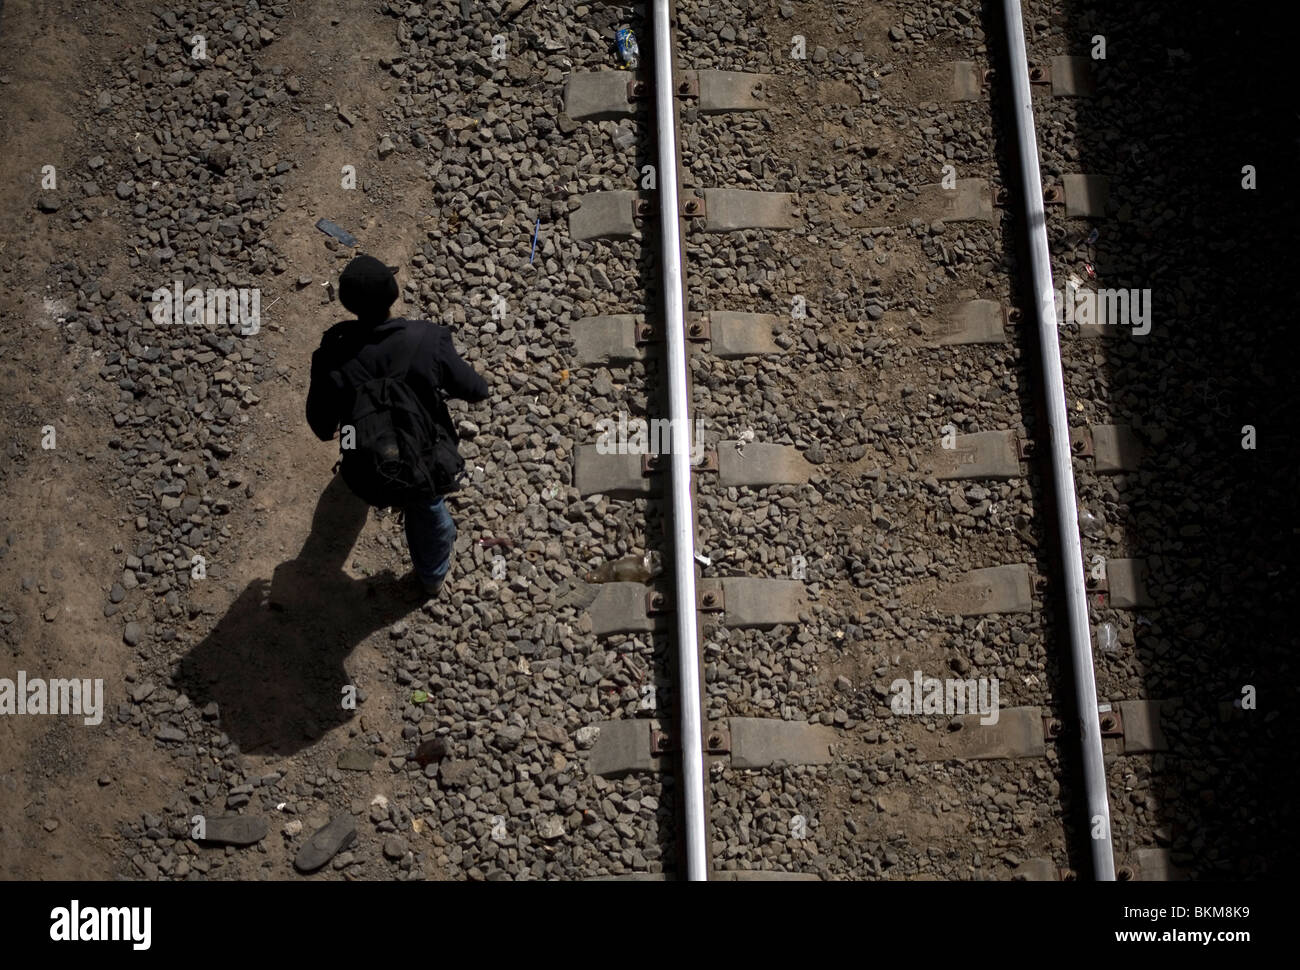 An undocumented Central American migrant traveling across Mexico to the United States walks along a railway track in Mexico City Stock Photo